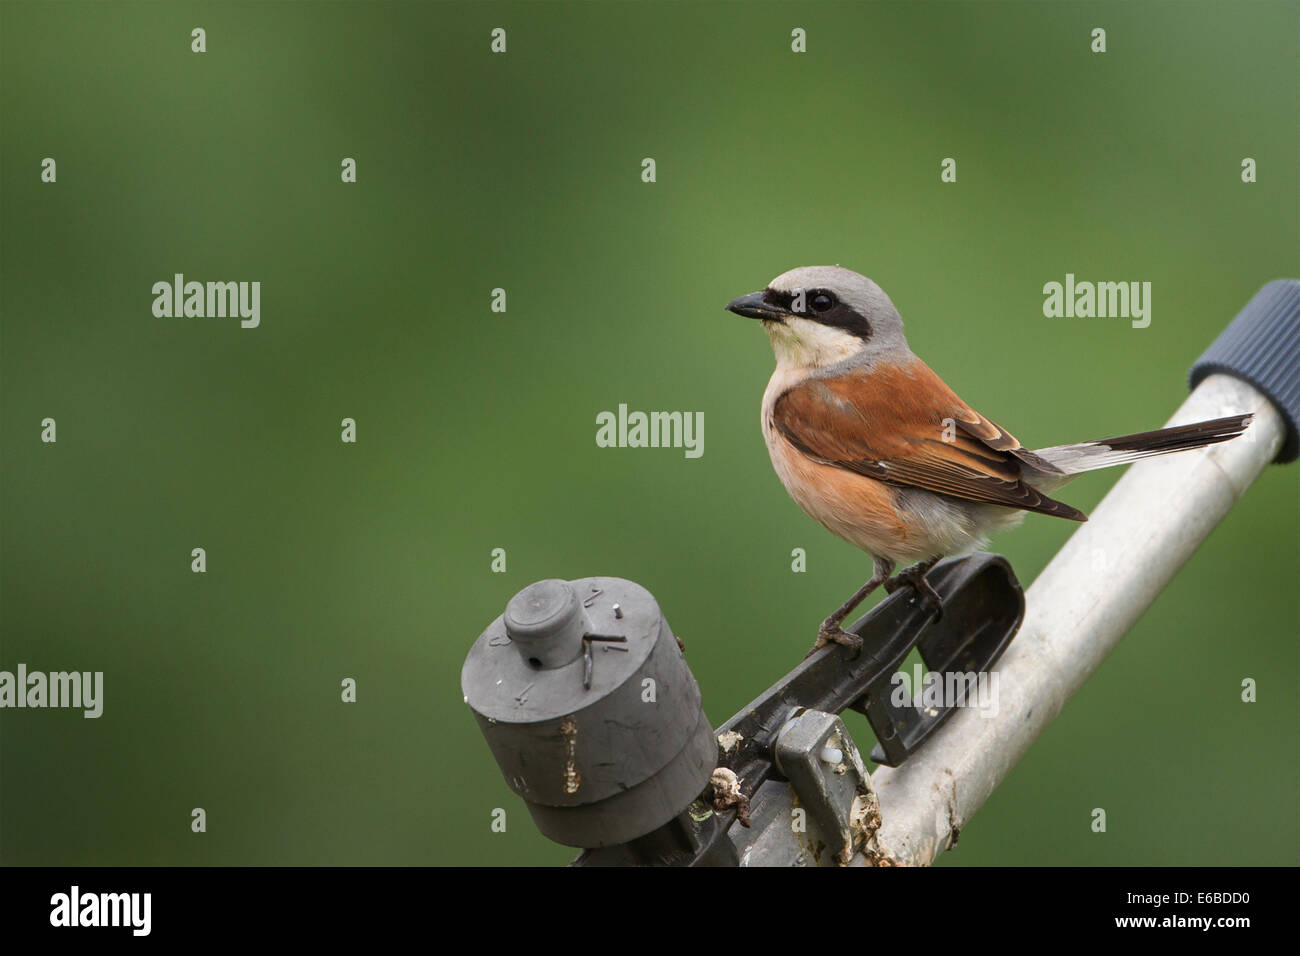 Red Backed Shrike perched on a sprinkler in the Italian Alps Stock Photo